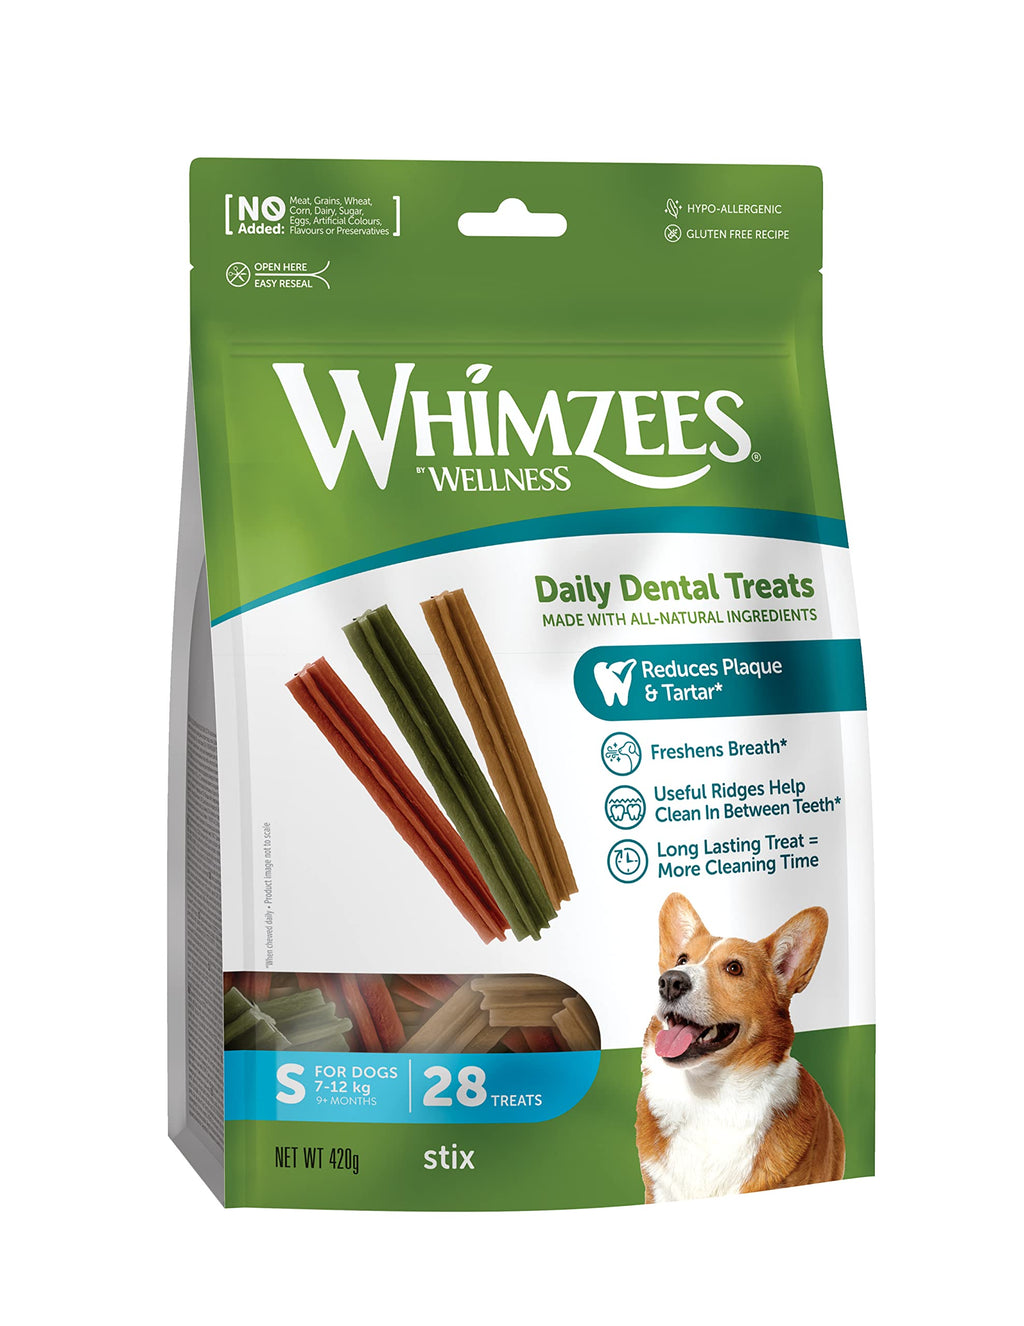 WHIMZEES By Wellness Stix, Natural and Grain-Free Dog Chews, Dog Dental Sticks for Small Breeds, 28 Pieces, Size S Small Breed (7-12kg) Value Bag - 28 pieces